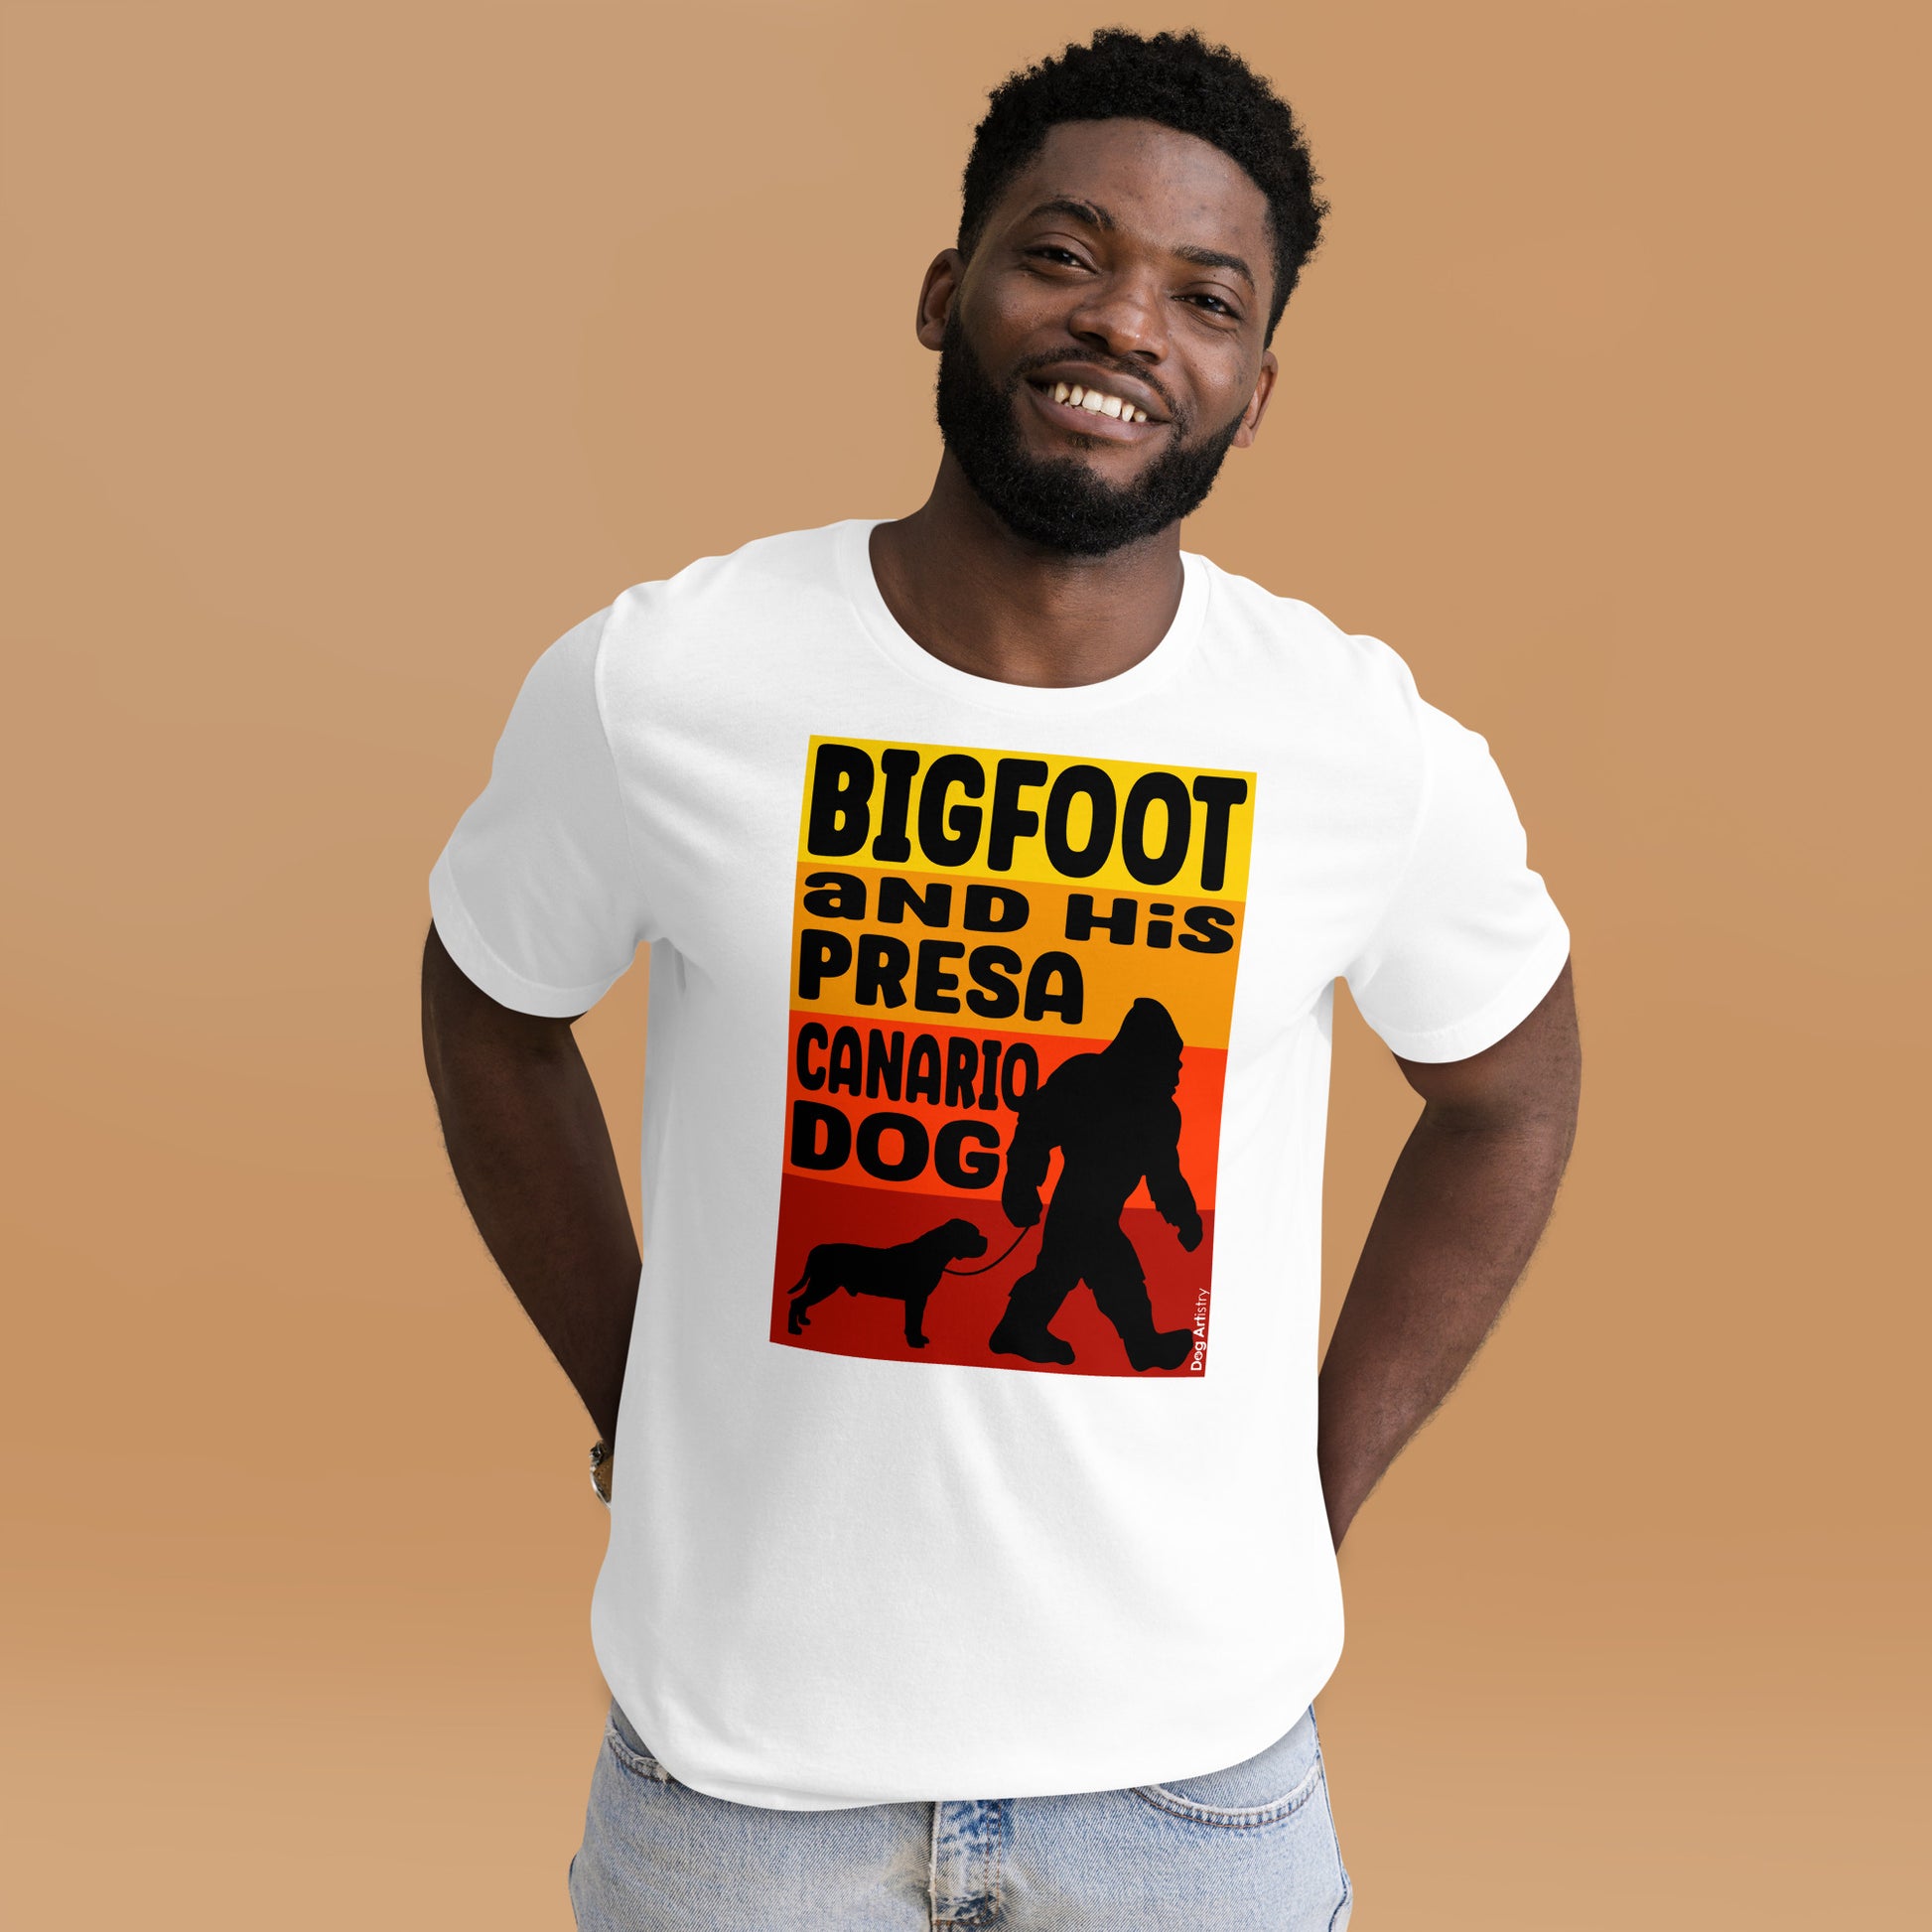 Bigfoot and his presa canario unisex white t-shirt by Dog Artistry.